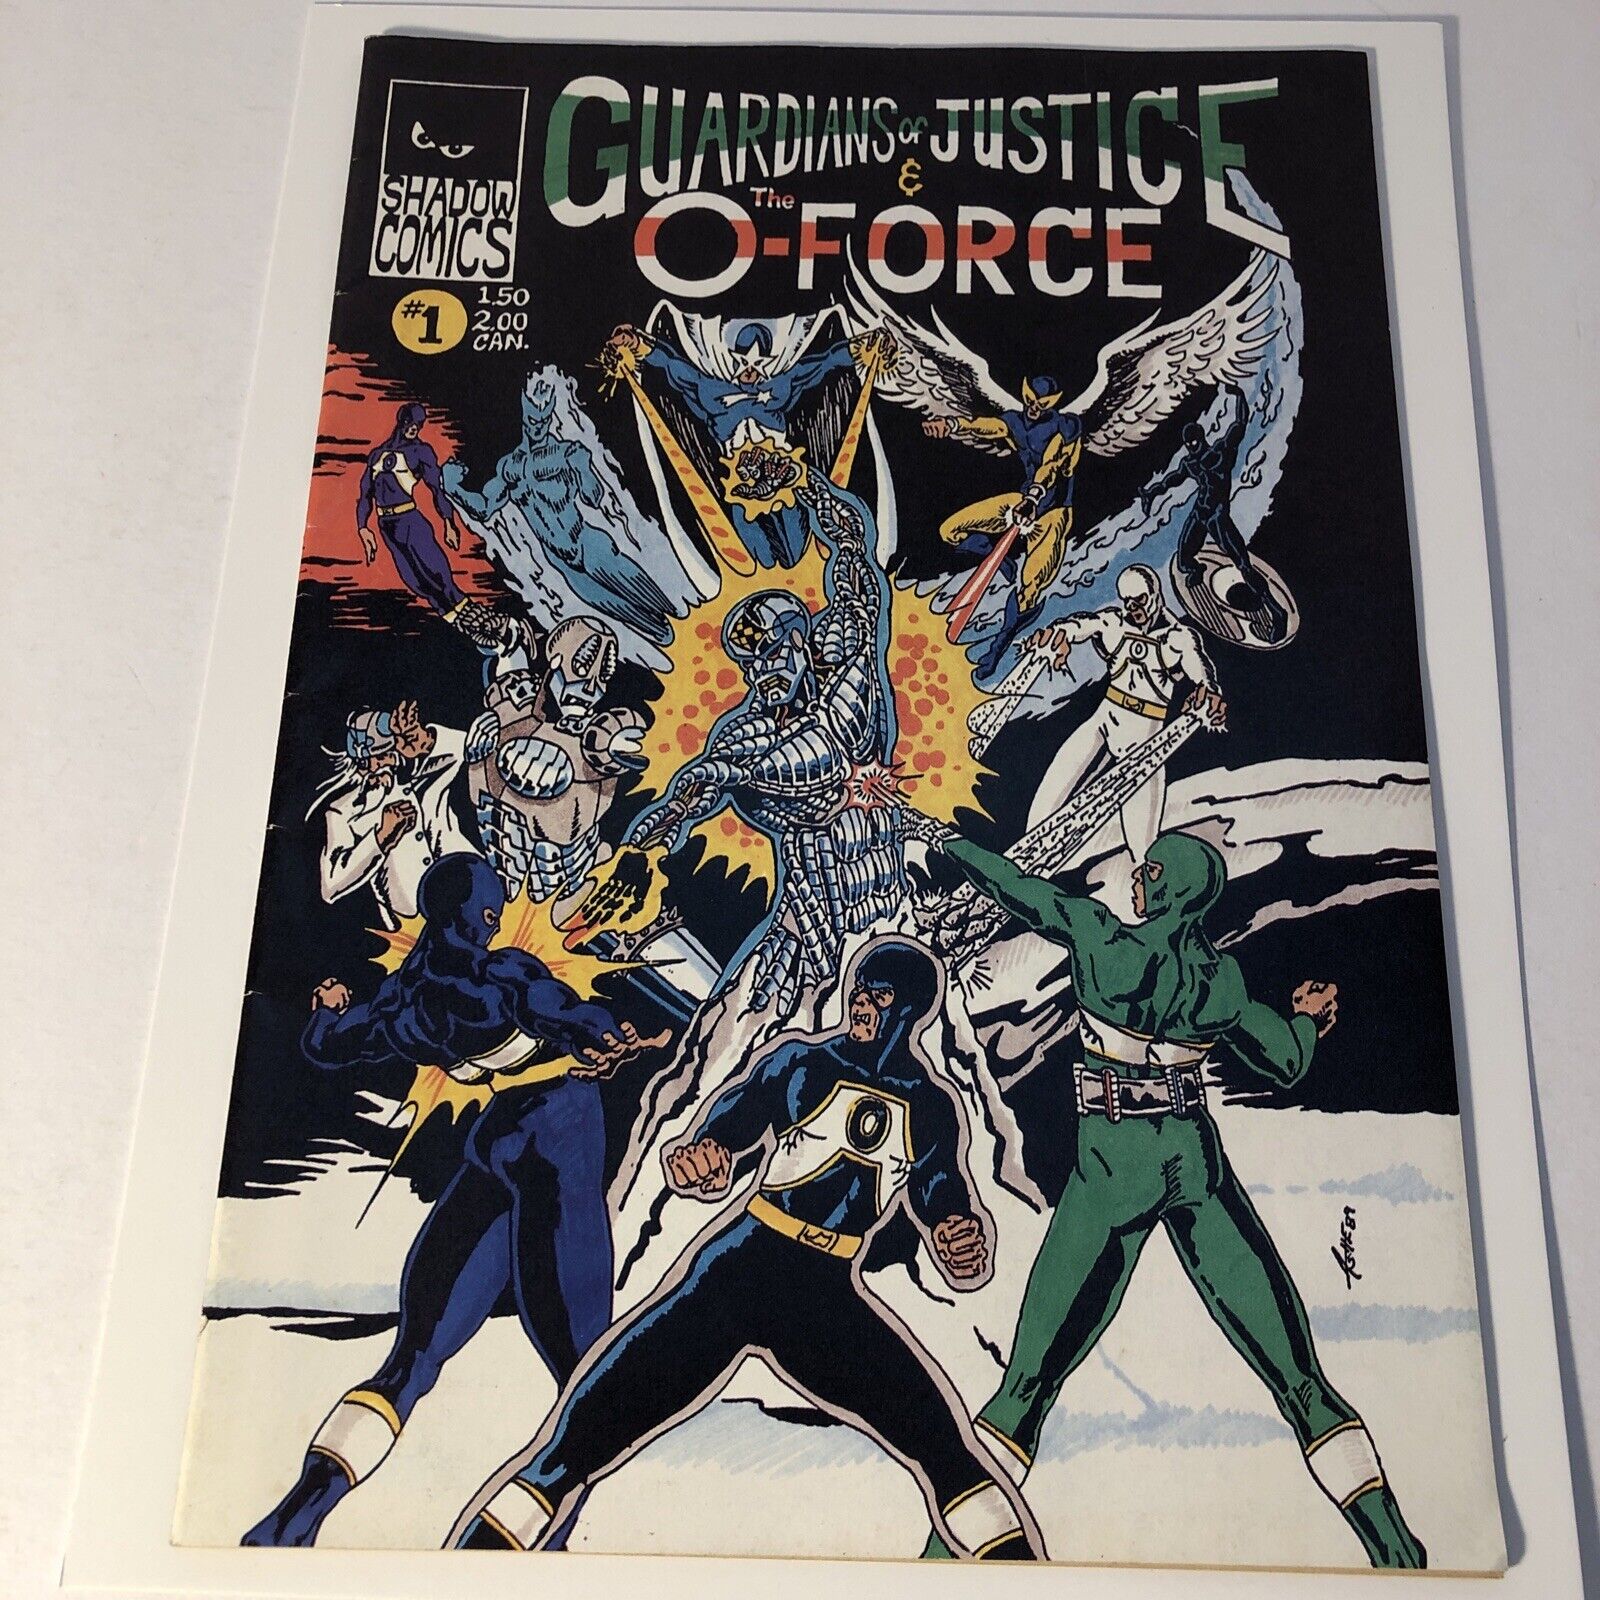 Guardians of Justice & The O-Force #1 Comic by Shadow Comics First Appearances